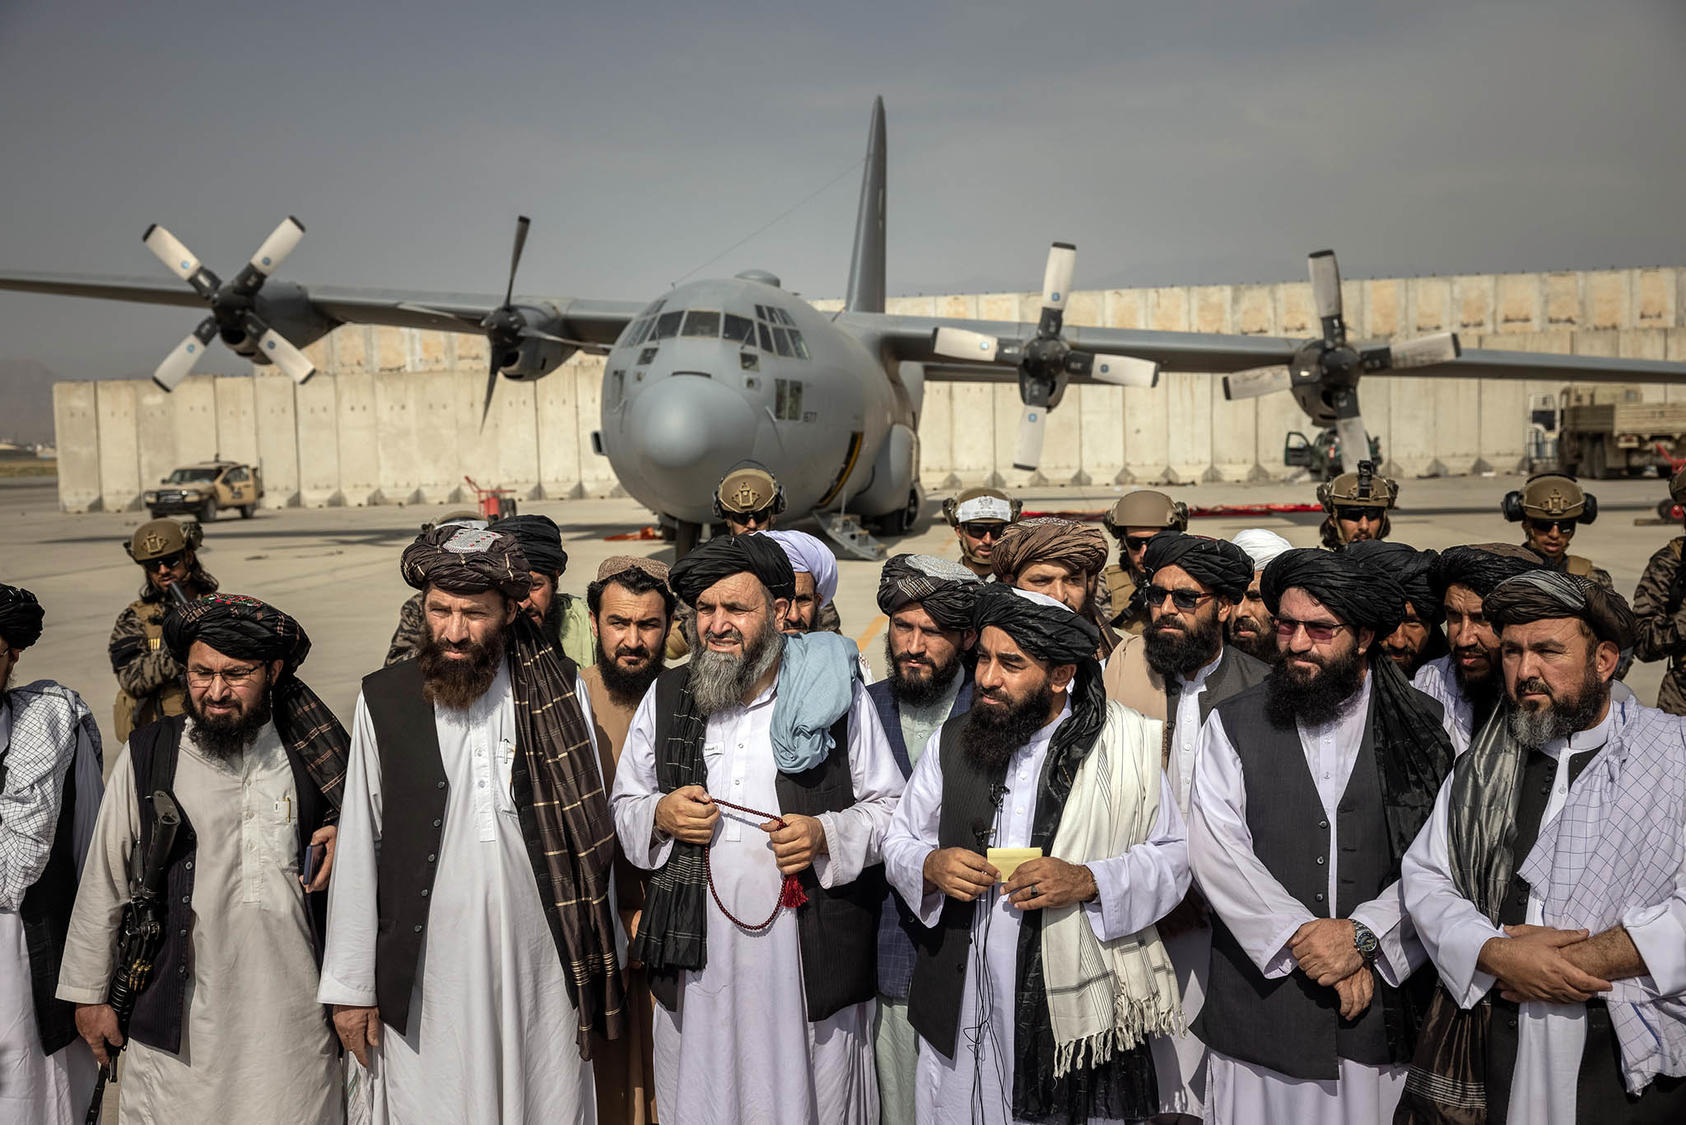 A Year After the Taliban Takeover: What’s Next for the U.S. in Afghanistan?